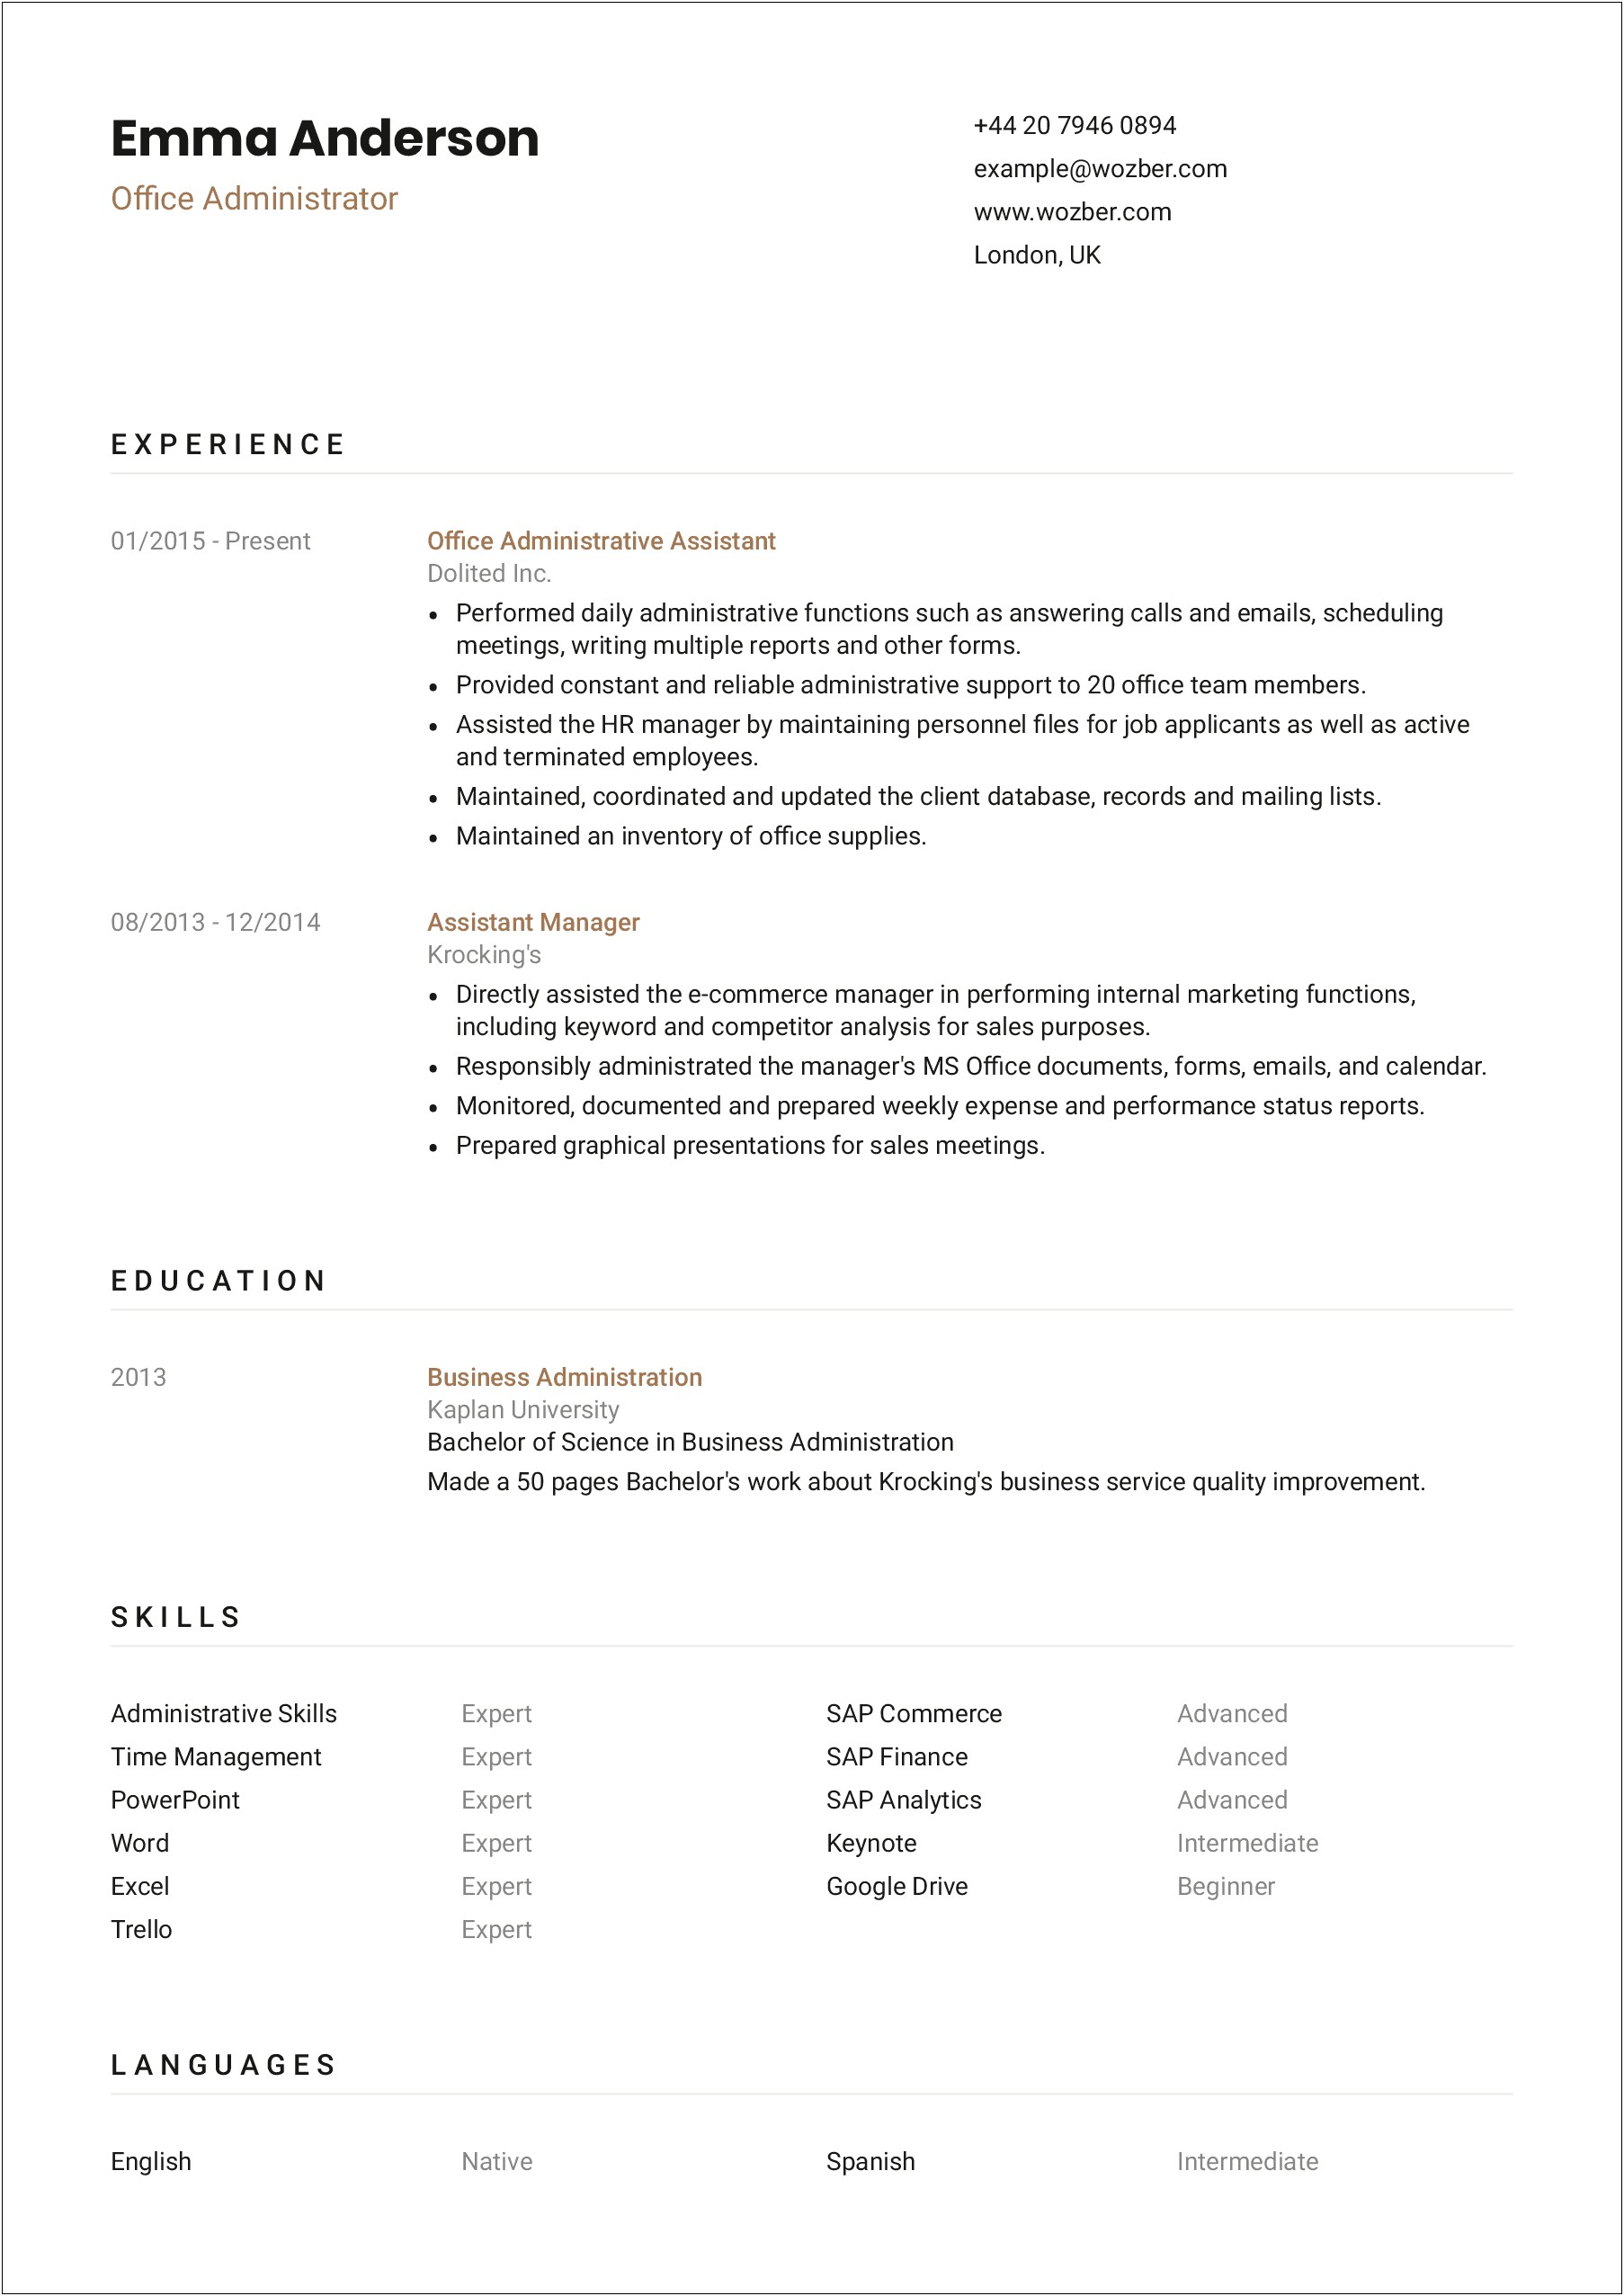 Skill Based Resume For Account Executive